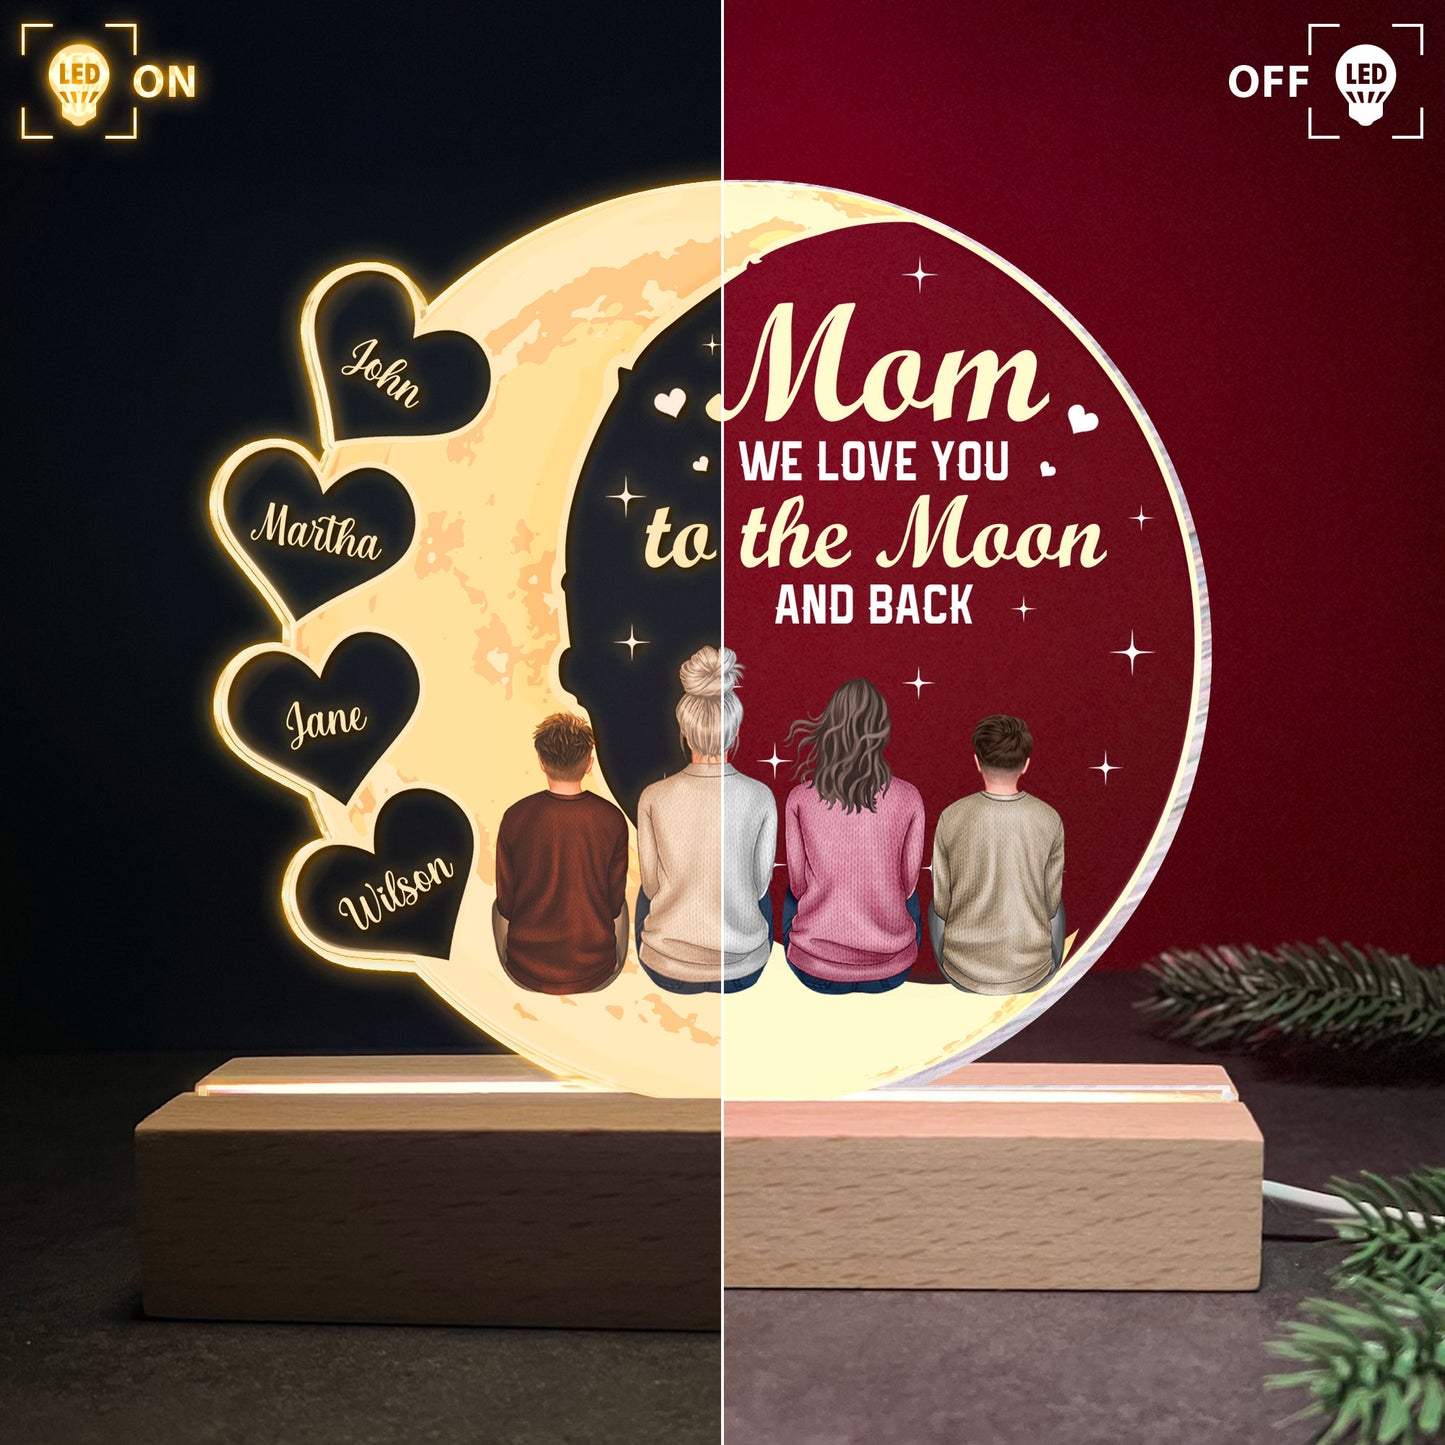 Mom We Love You To The Moon And Back - Personalized LED Light